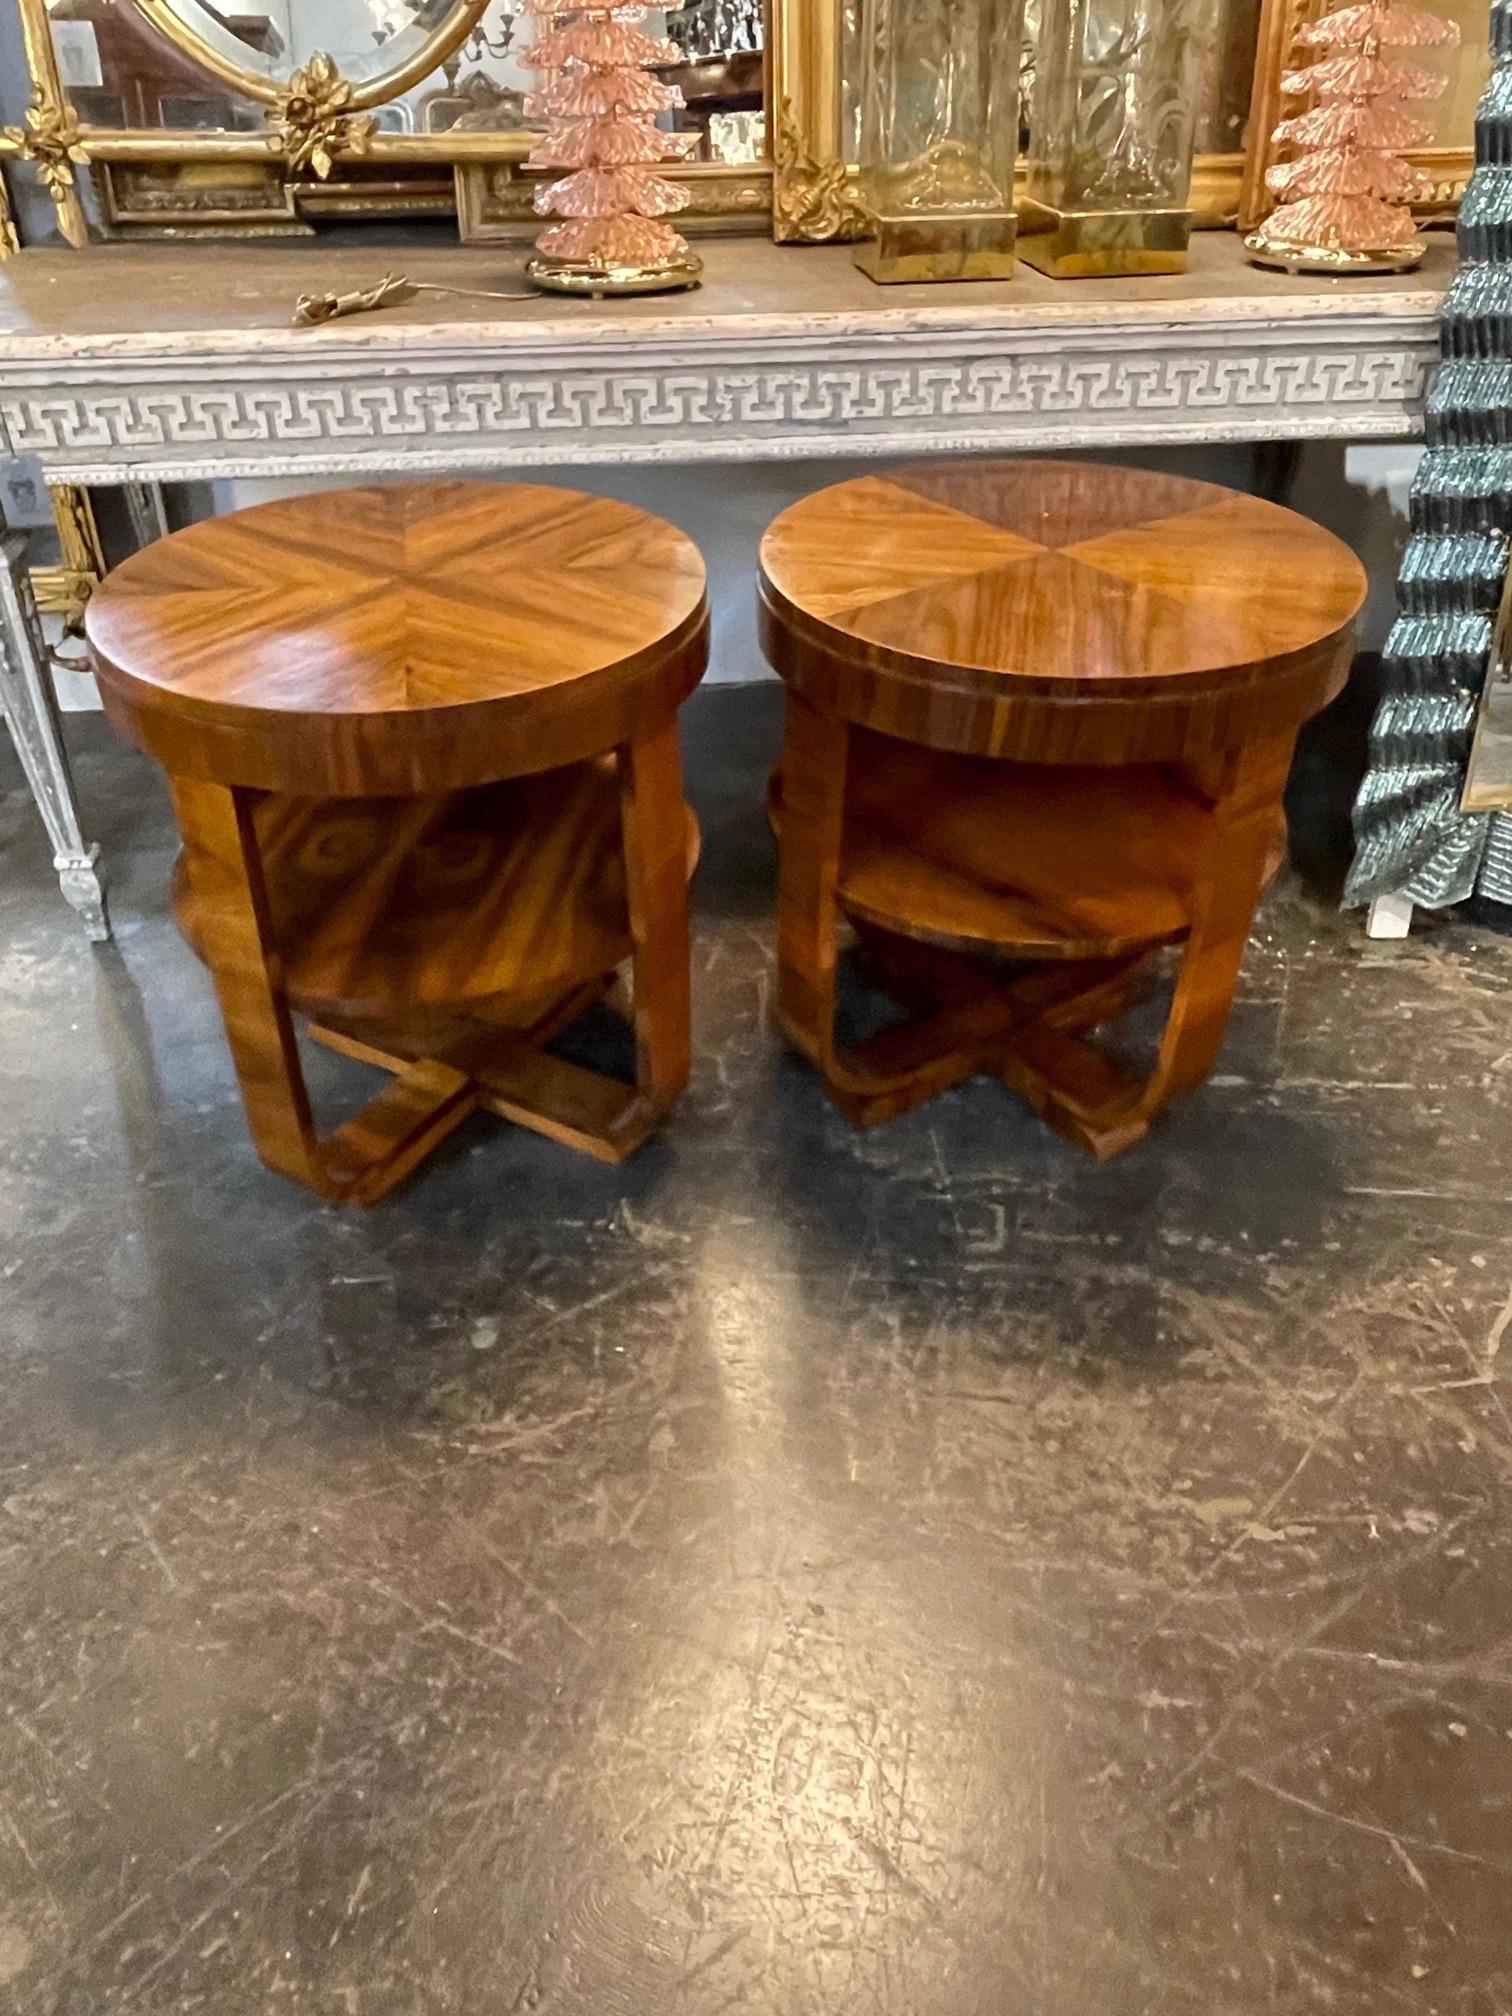 Handsome pair of Italian walnut side tables. Very fine quality on these. Creates a very polished look. Note: Price listed is per item.